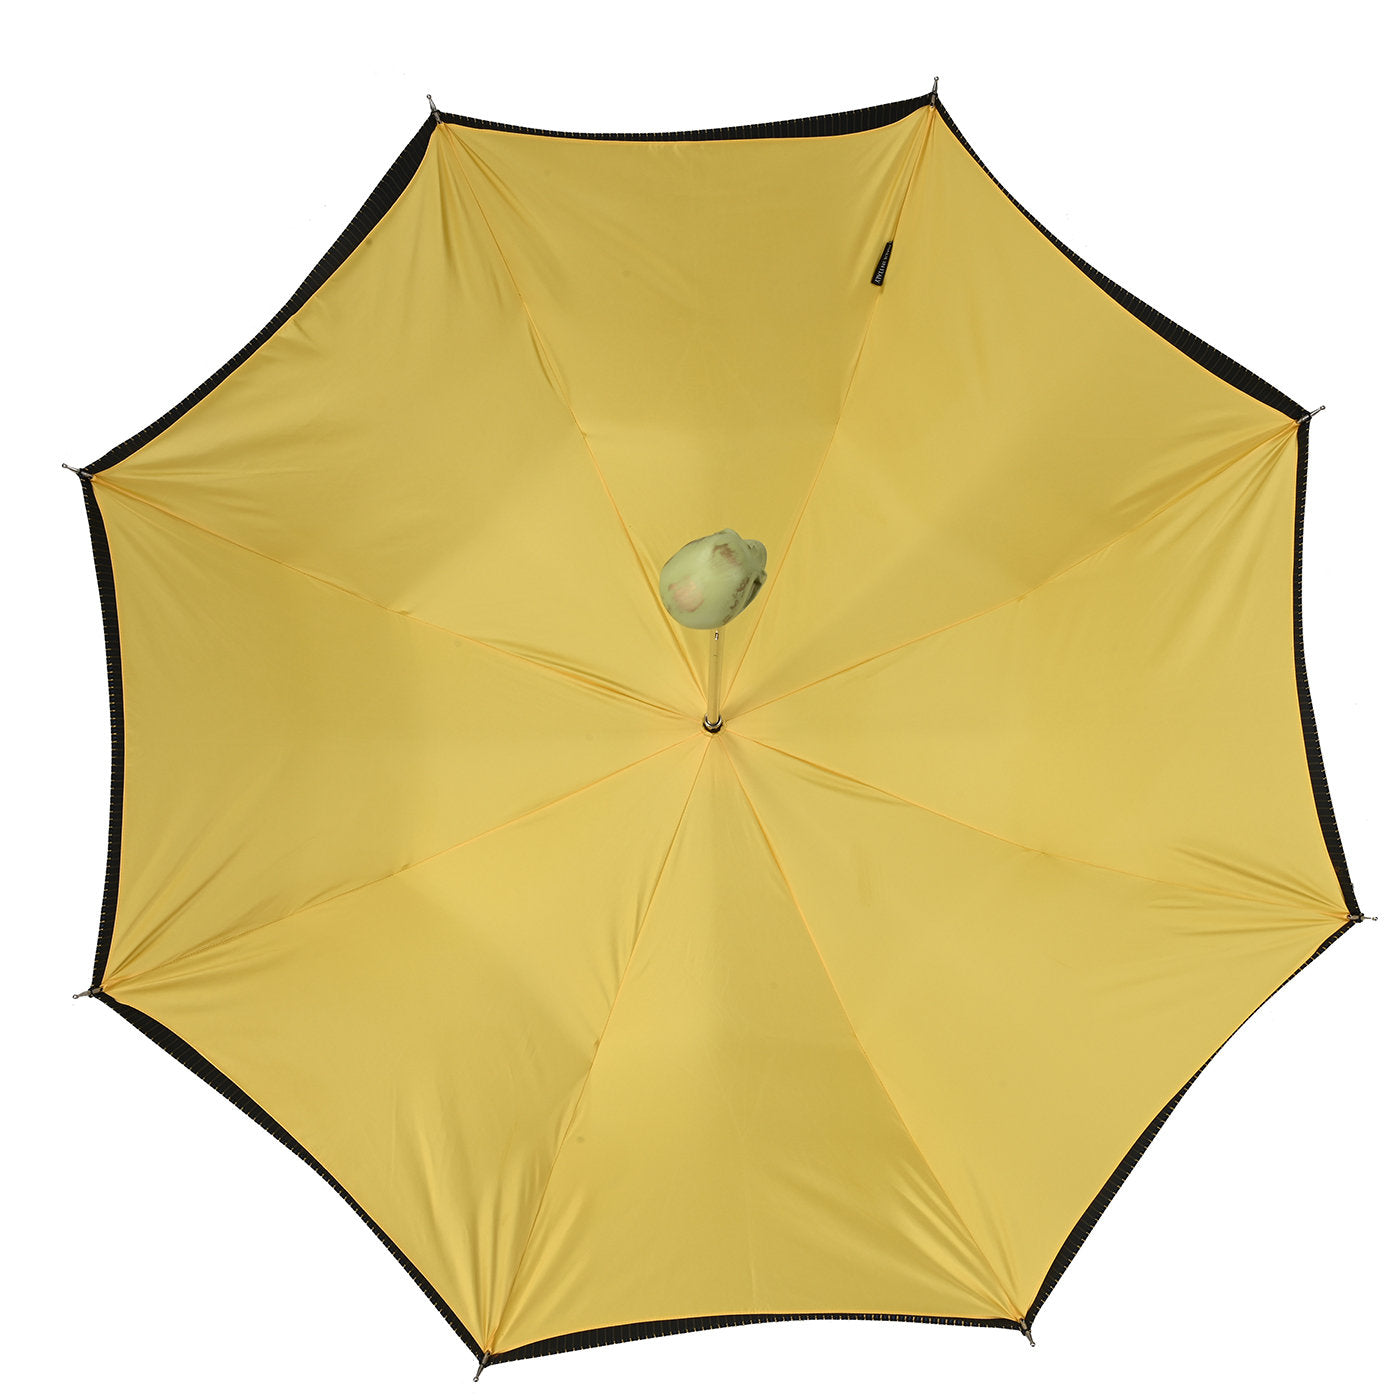 Yellow and Blue Striped Umbrella with Green Skull Handle - Alternative view 2